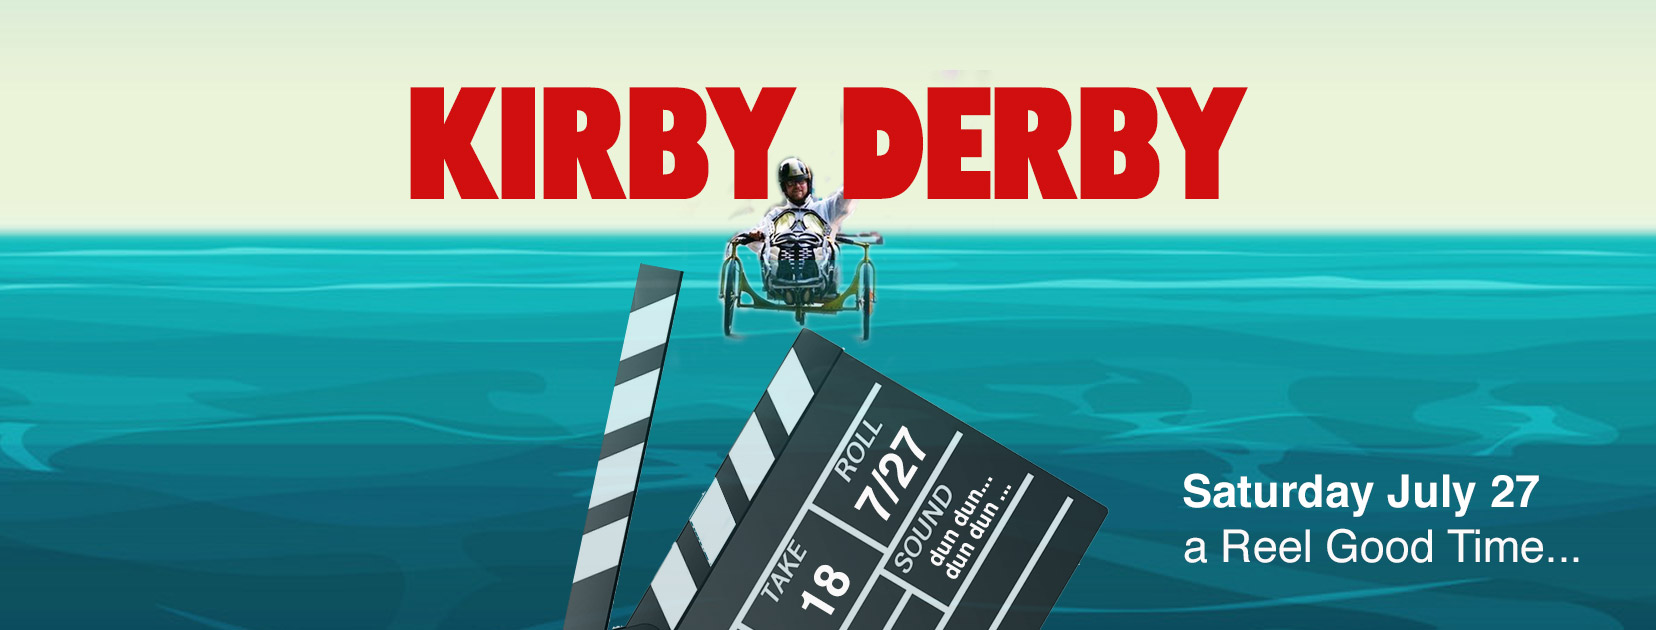 Kirby Derby 2019 Image